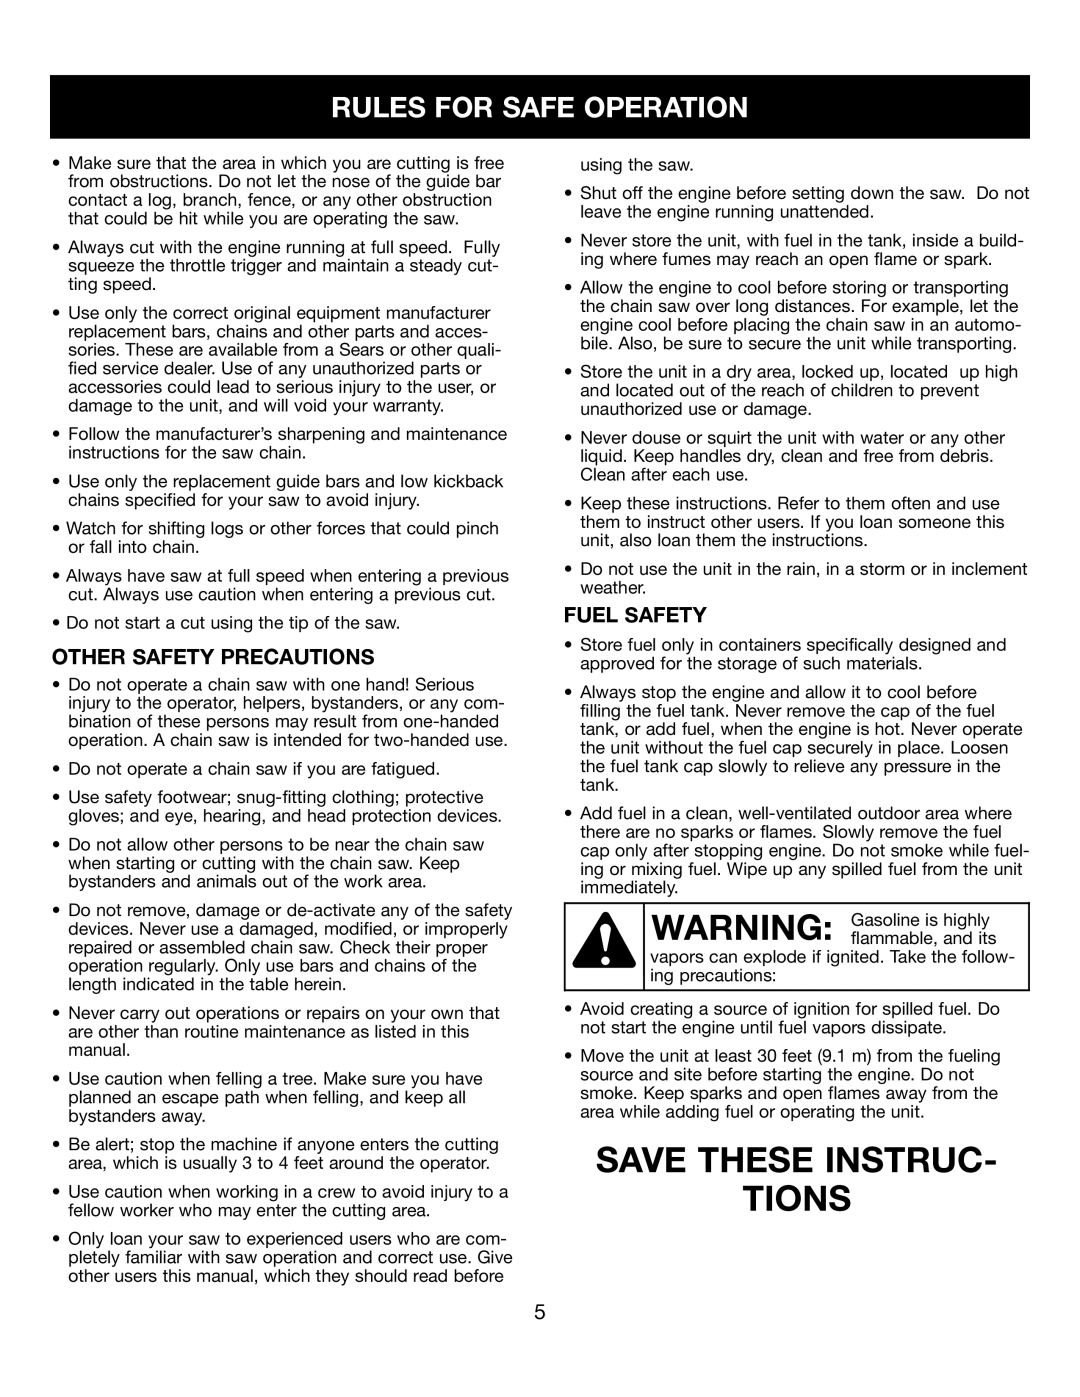 Craftsman 316350840 manual Save These Instruc Tions, Rules For Safe Operation, Other Safety Precautions, Fuel Safety 